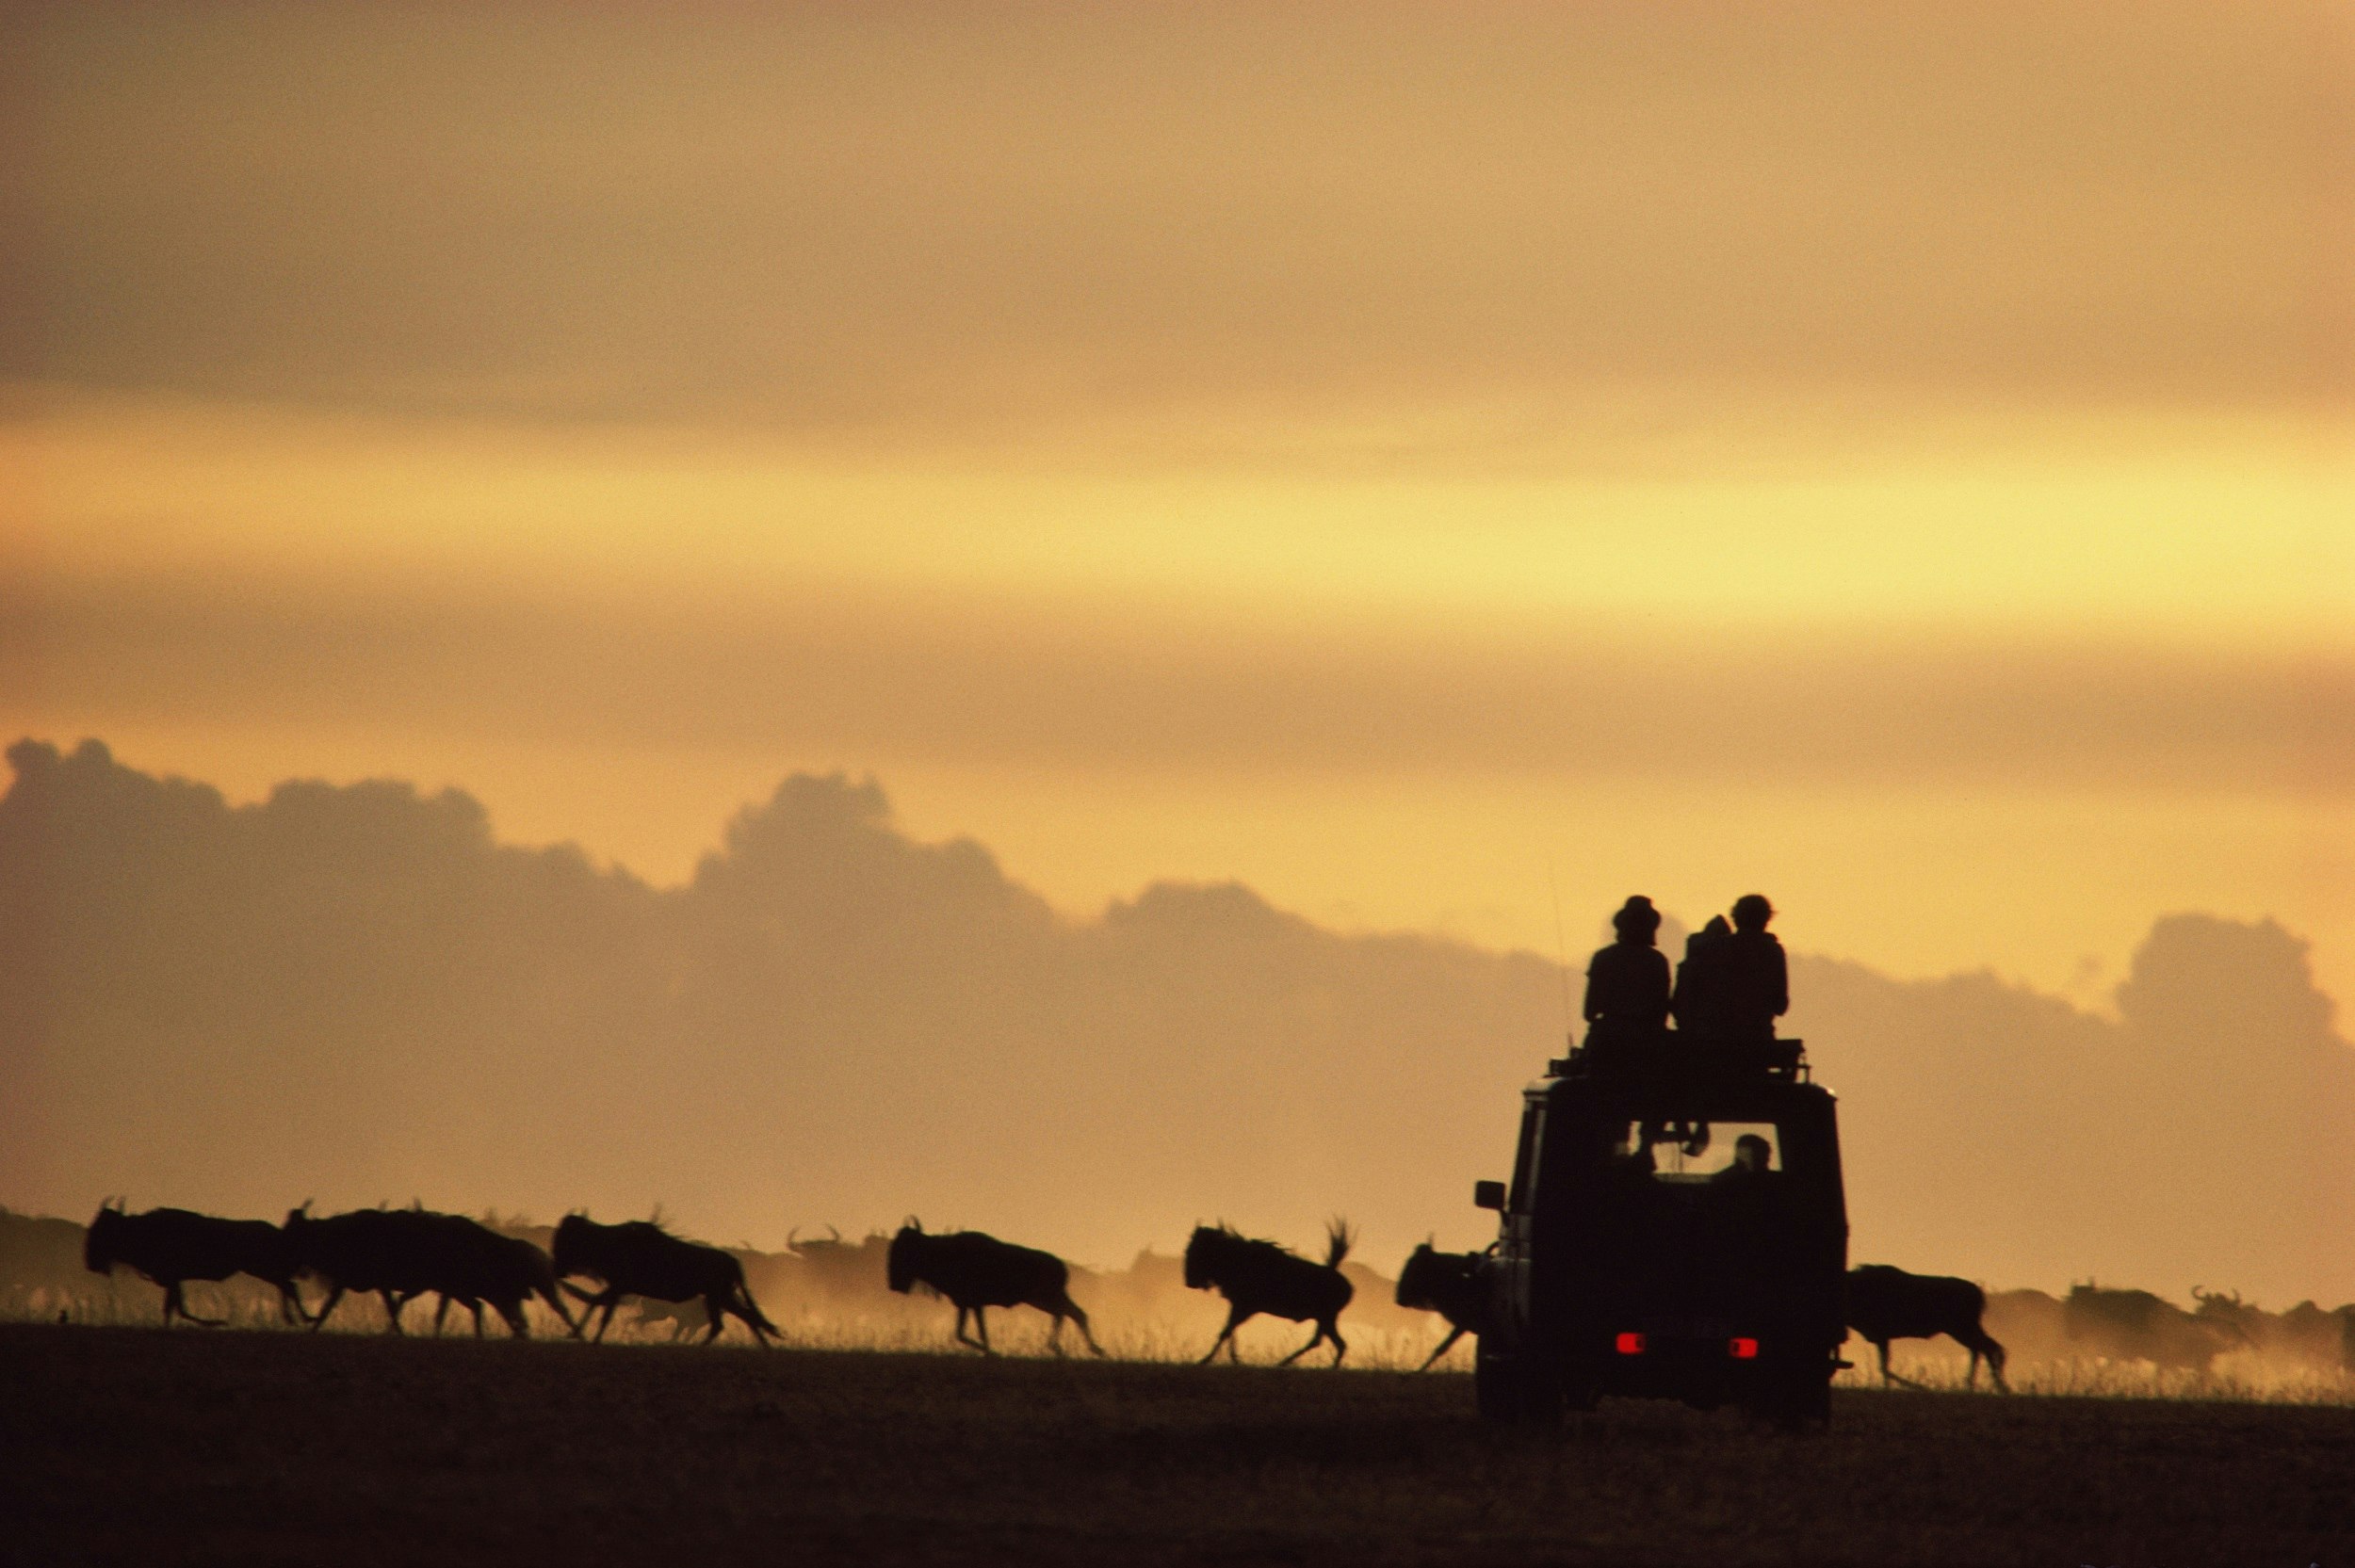 Three people sit on the roof of a 4WD safari vehicle; in front of the them runs a herd of wildebeest. The sky in the background is golden, with a low cloud looking like mountains on the horizon. The people, truck and wildebeest are all in silhouette.